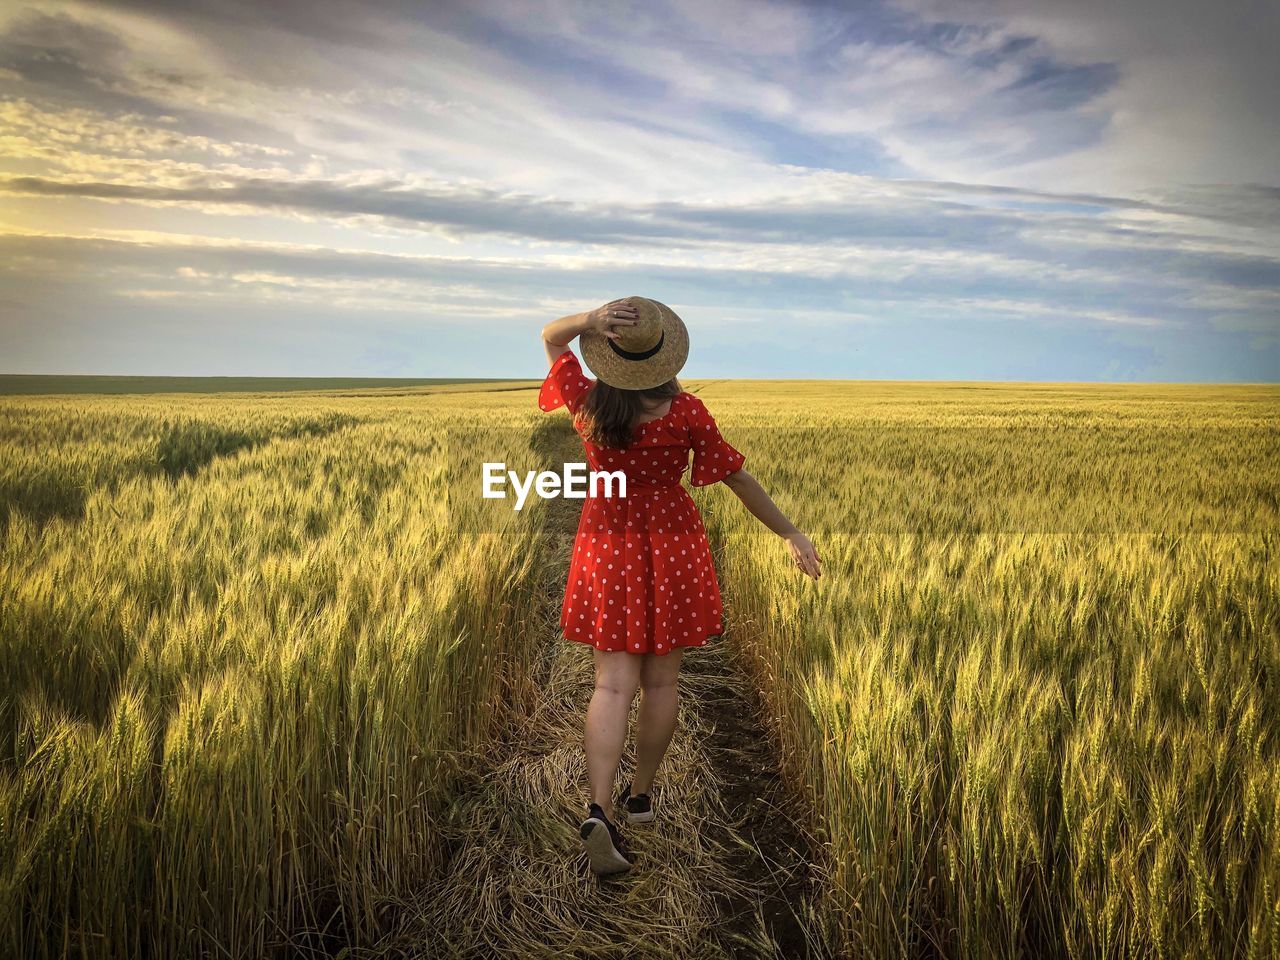 Rear view of woman wearing a red dress and a straw hat standingin a wheat field